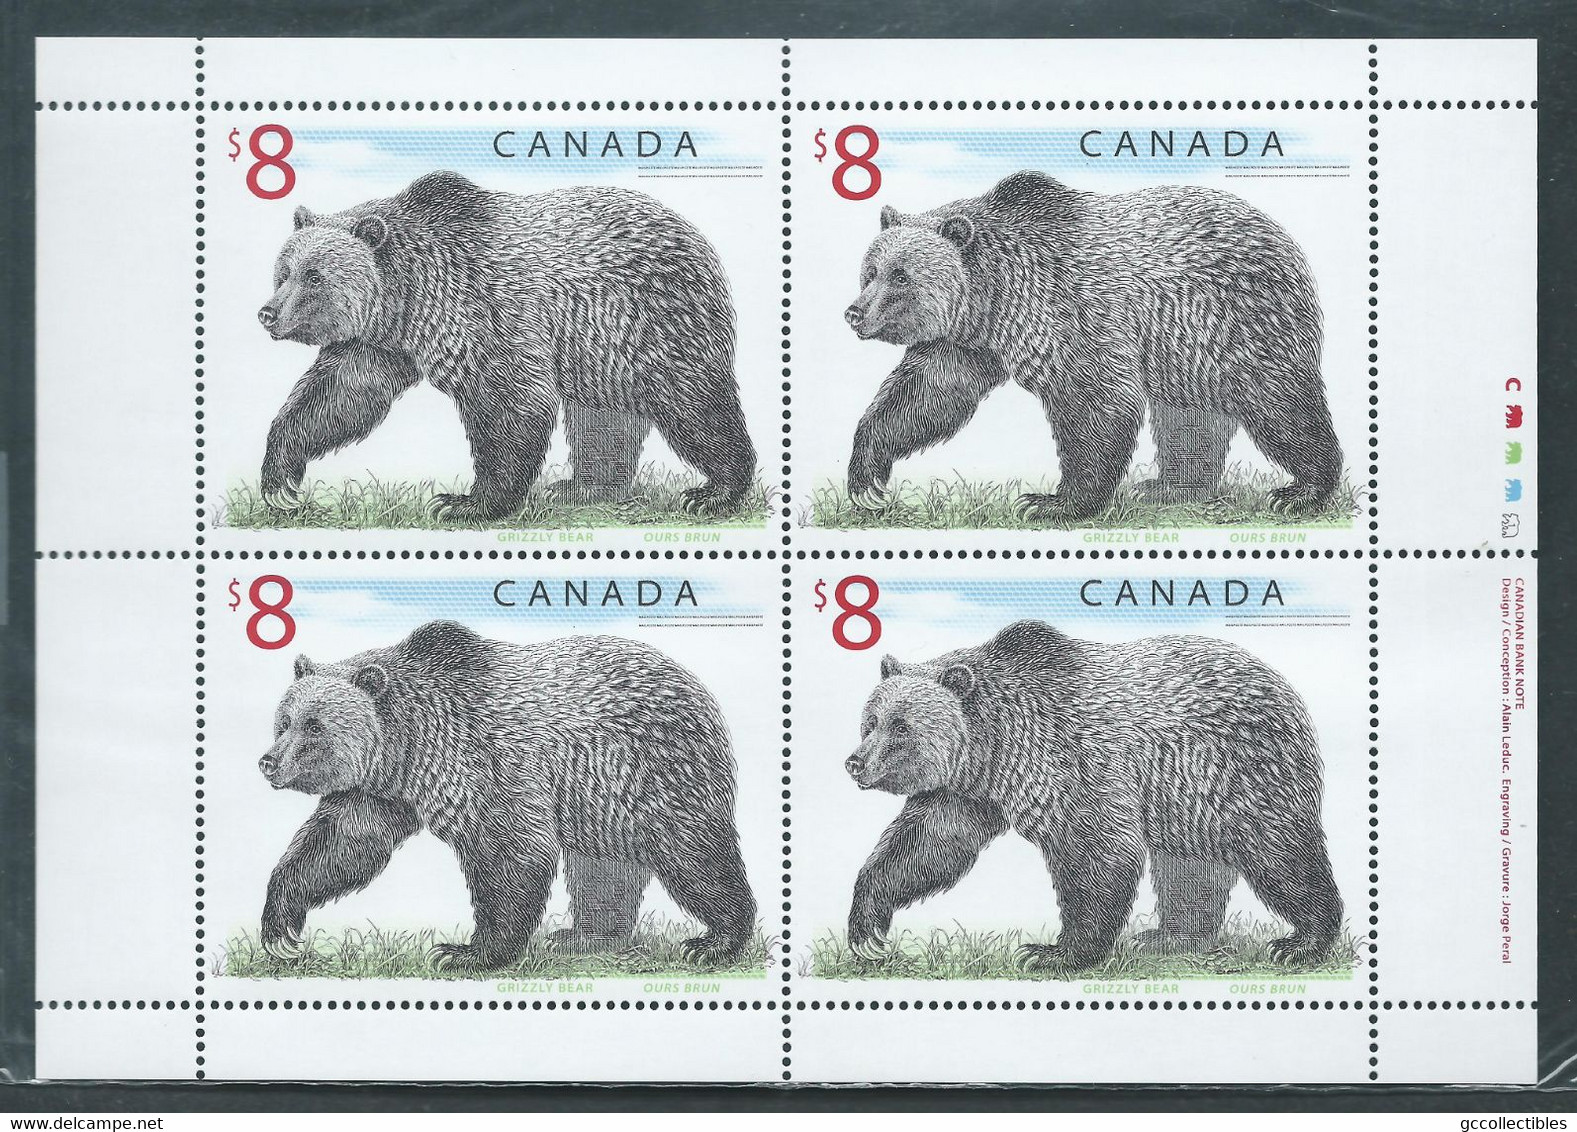 Canada # 1694 Full Pane Of 4 MNH With Inscription - Wildlife Defiitives - Grizzly Bear - Volledige & Onvolledige Vellen